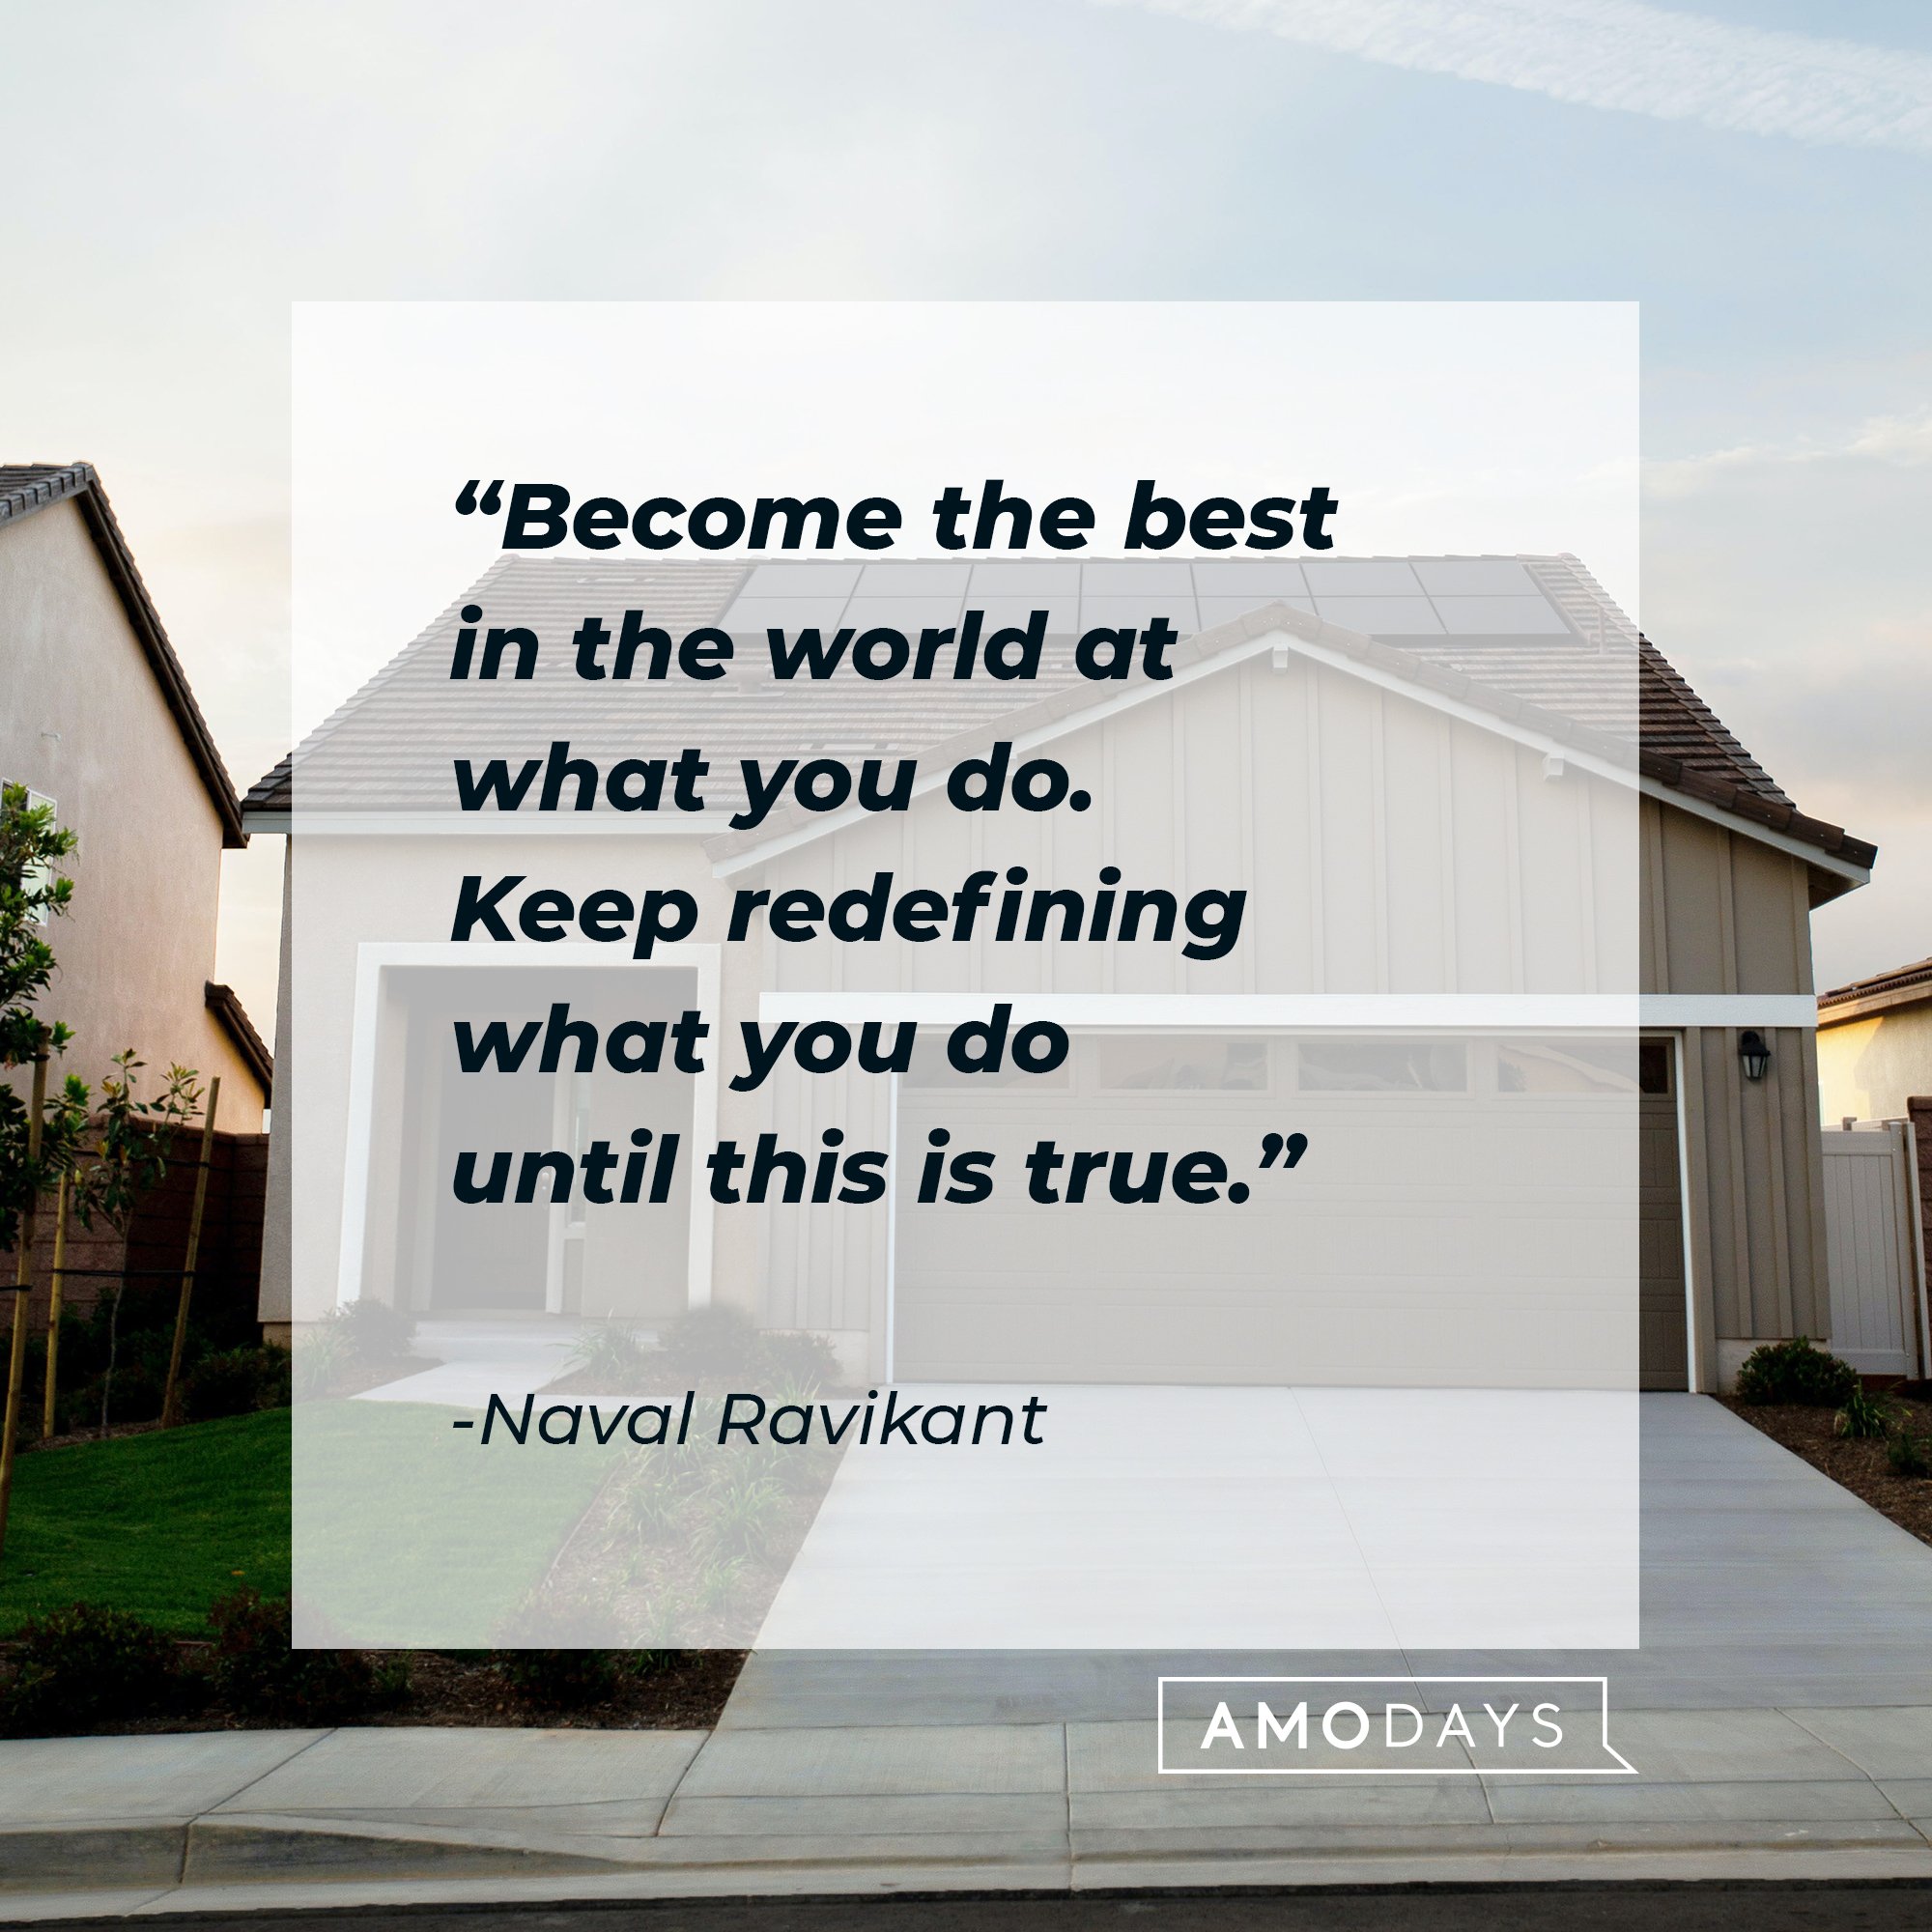 Naval Ravikant's quote: "Become the best in the world at what you do. Keep redefining what you do until this is true." | Image: AmoDays